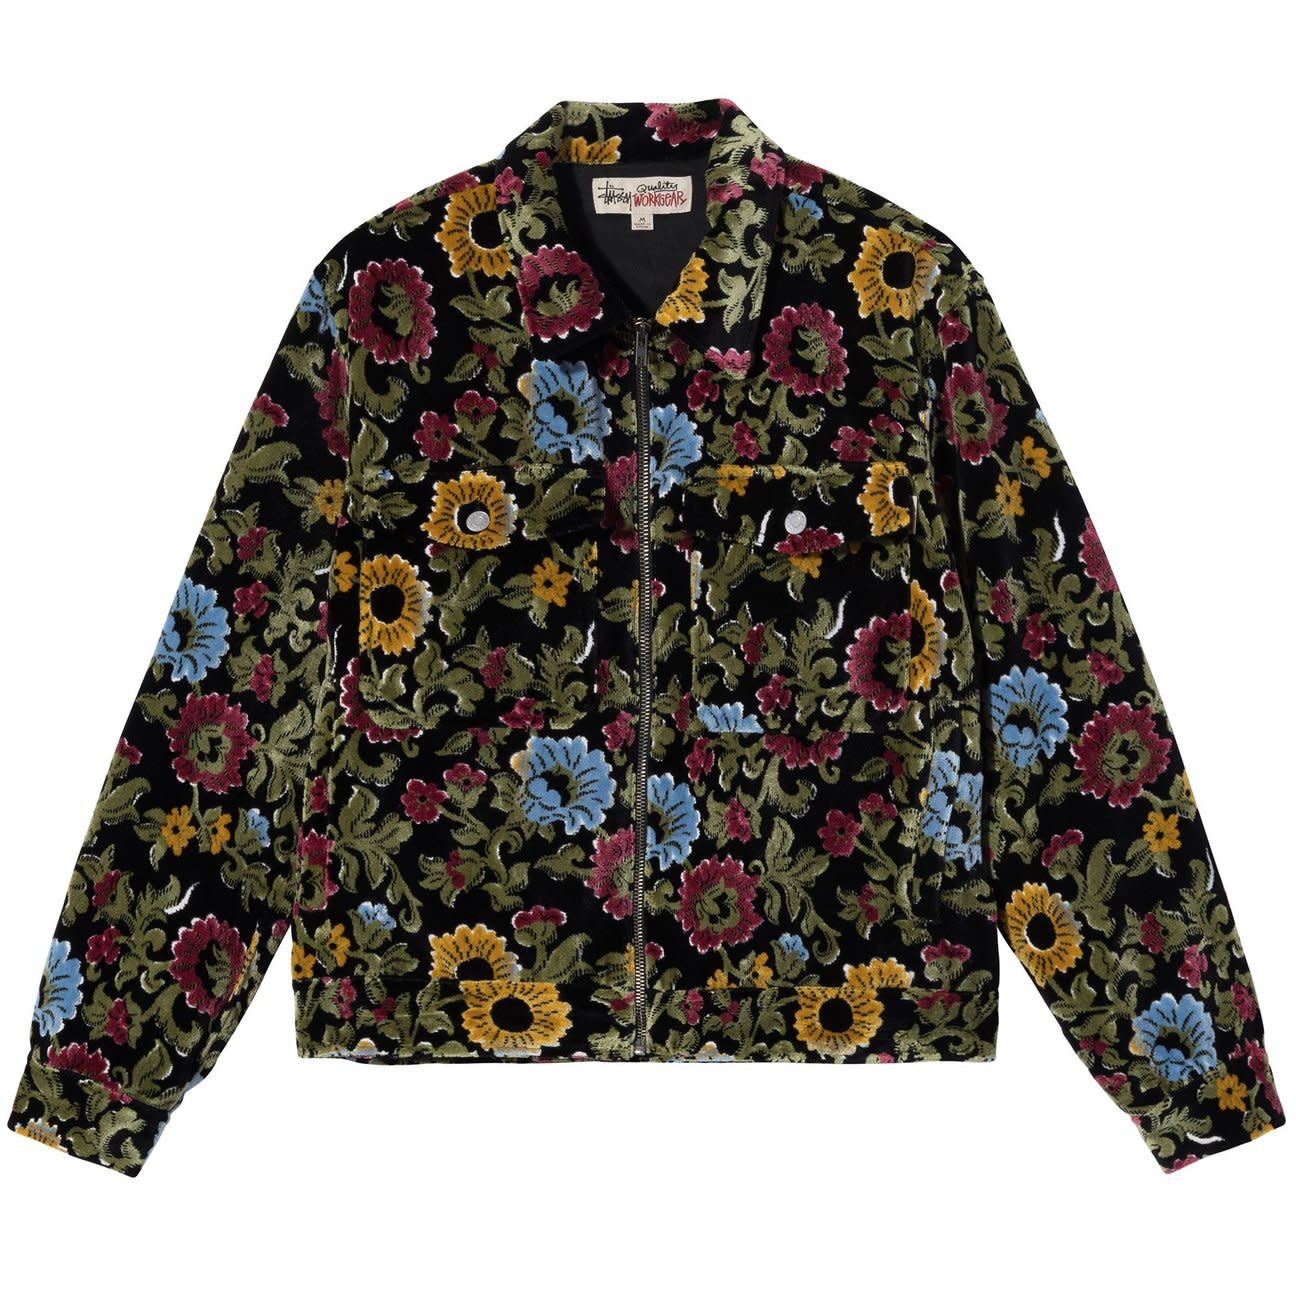 in an orange and green version of the floral jacket - STUSSY